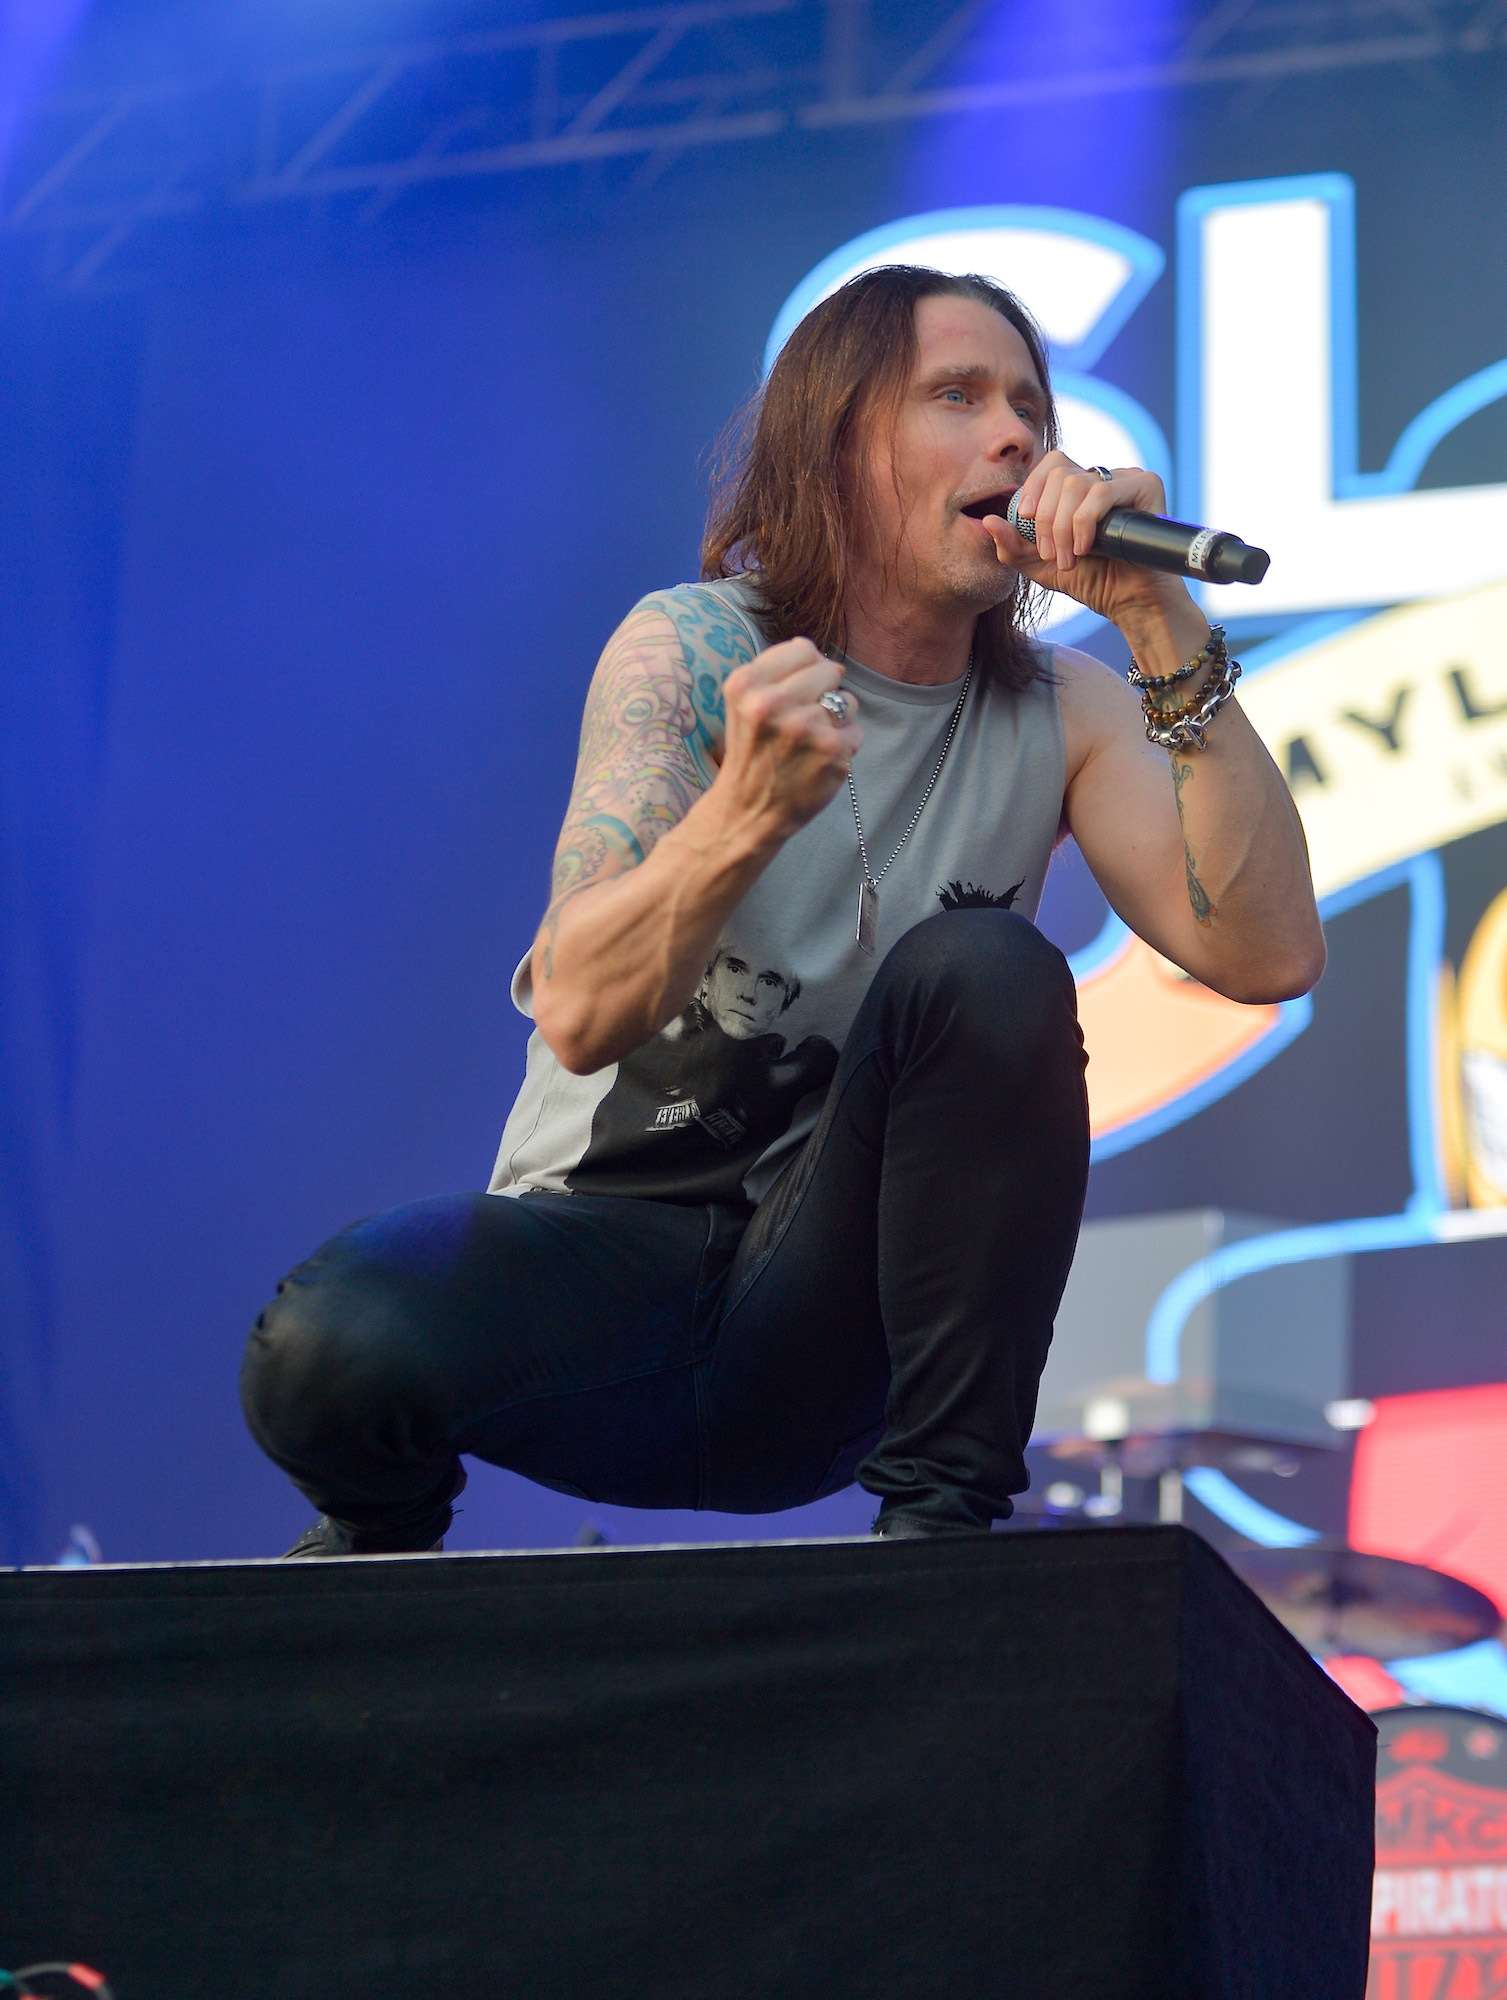 SLASH Featuring Myles Kennedy And The Conspirators Live at Lollapalooza [GALLERY] 16